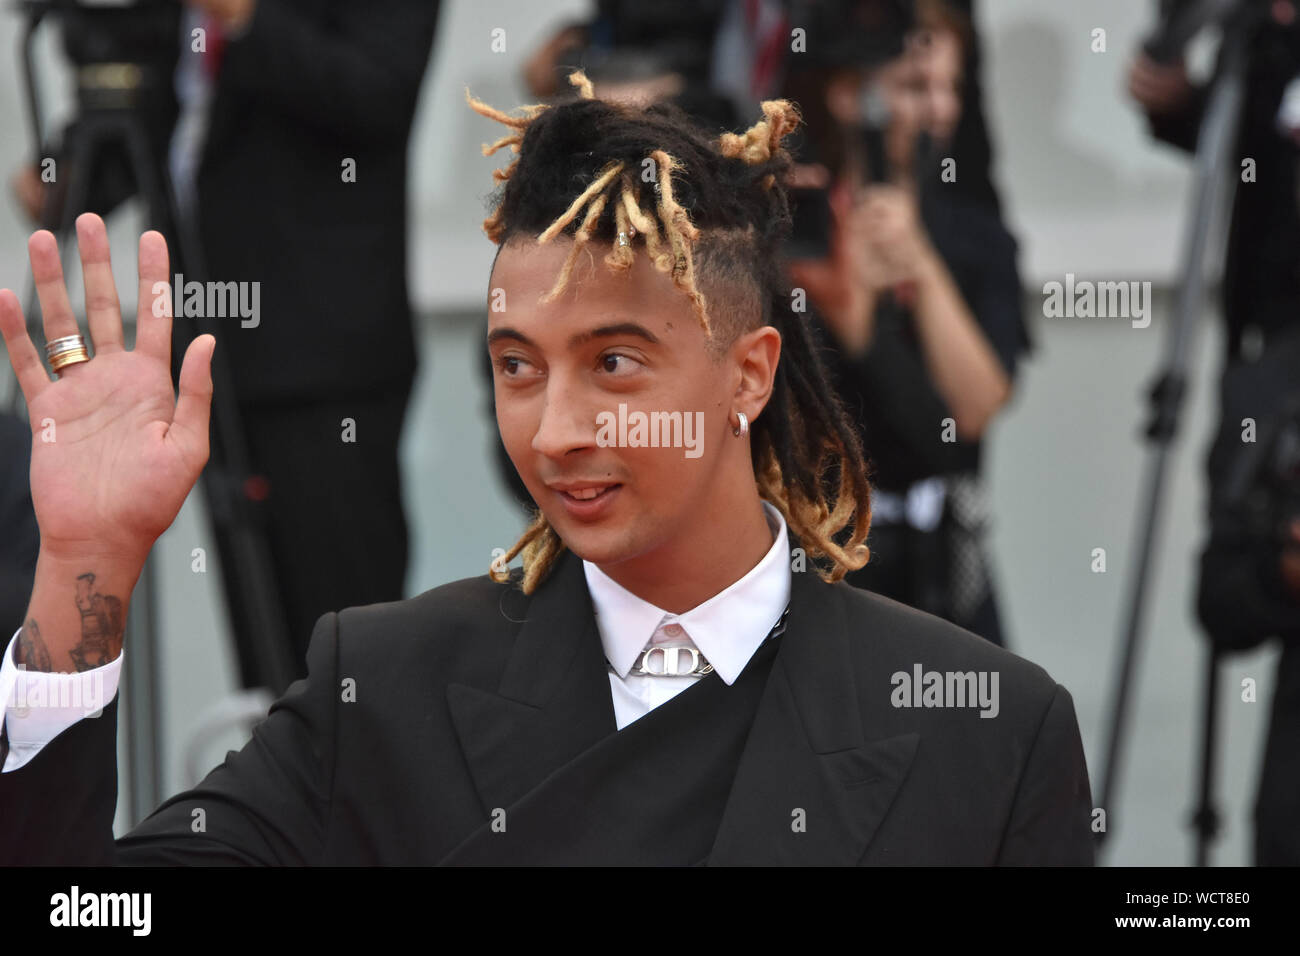 VENICE, Italy. 28th Aug, 2019. Ghali walks the red carpet ahead of the opening ceremony during the 76th Venice Film Festival at Sala Casino on August 28, 2019 in Venice, Italy. Credit: Andrea Merola/Awakening/Alamy Live News Stock Photo